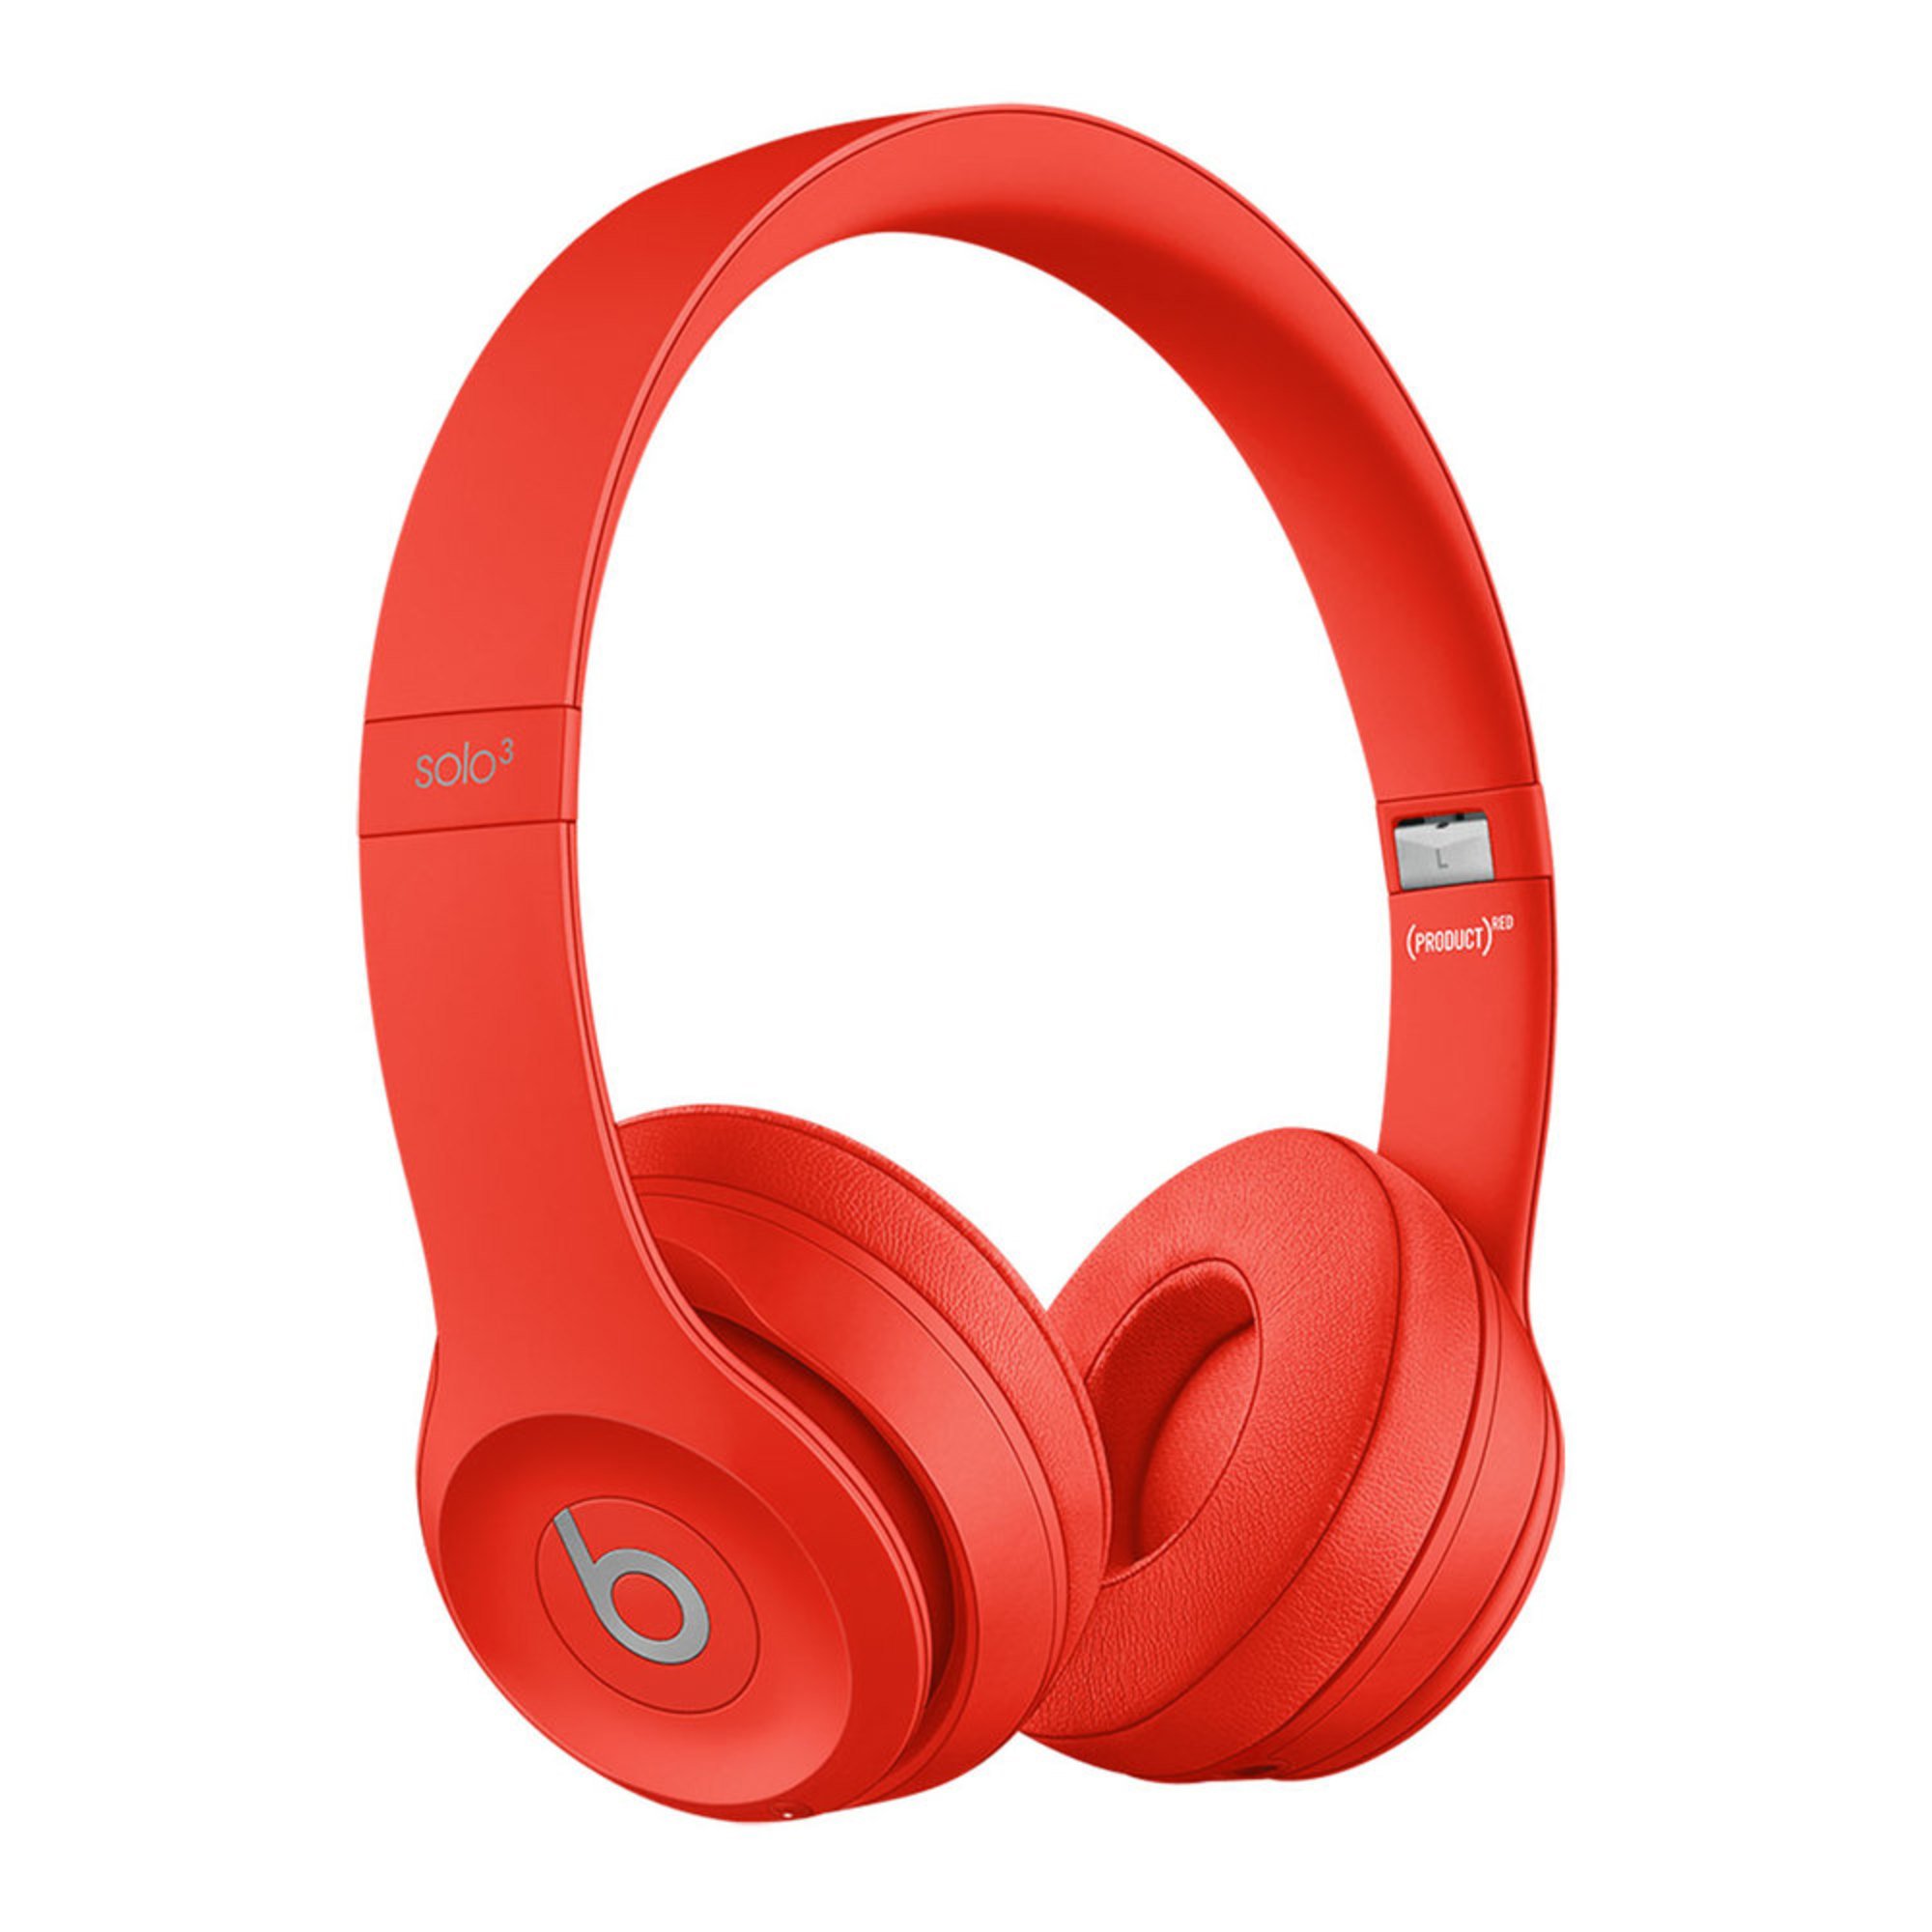 Beats Solo3 Wireless Headphones get new color options with the 'Club Collection'